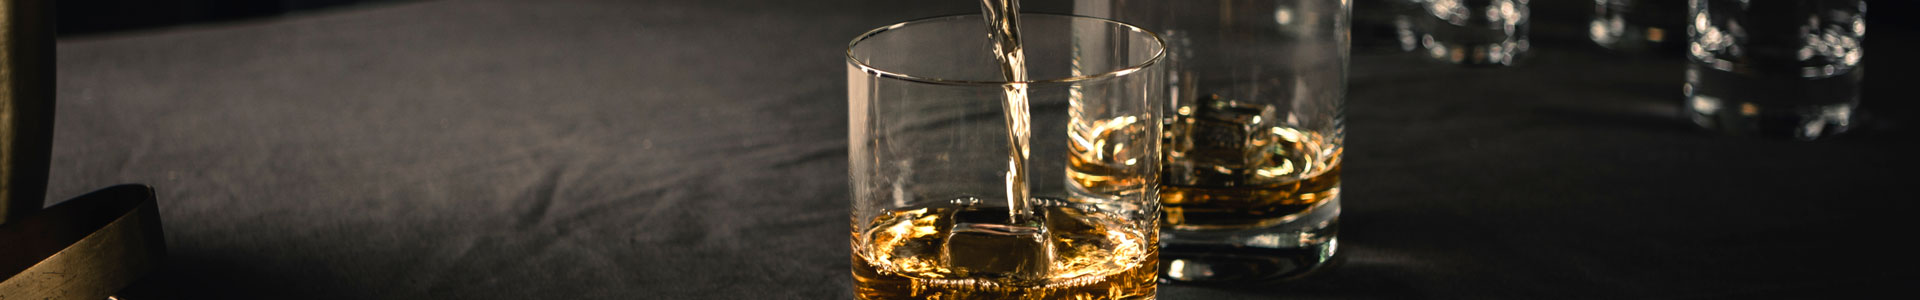 Whisky tumblers from the Paris glass series by Zwiesel.